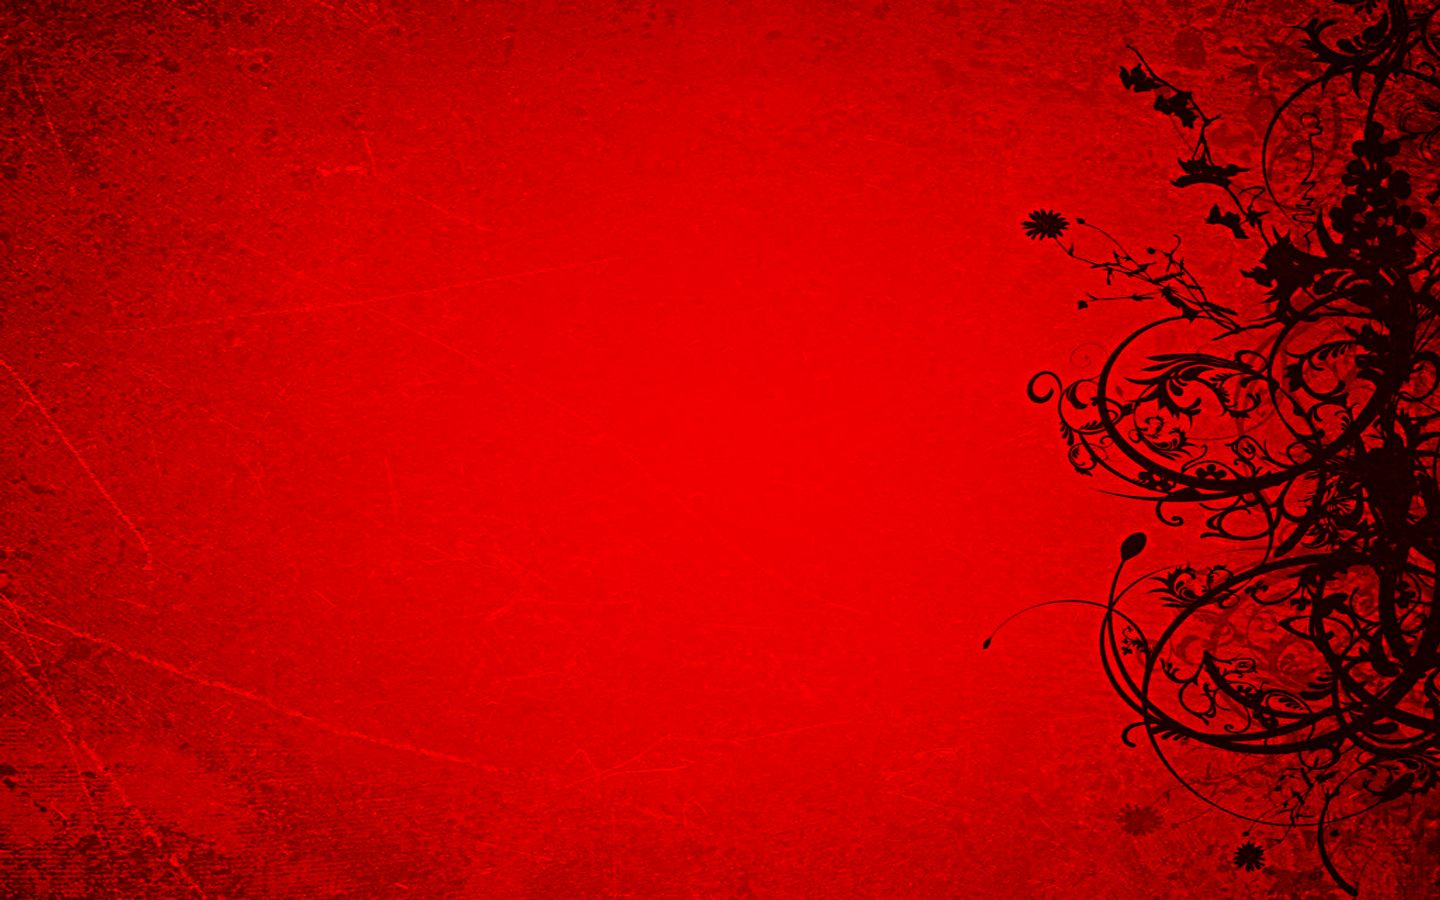 Red Background Pictures Wallpapersafari HD Wallpapers Download Free Images Wallpaper [wallpaper981.blogspot.com]